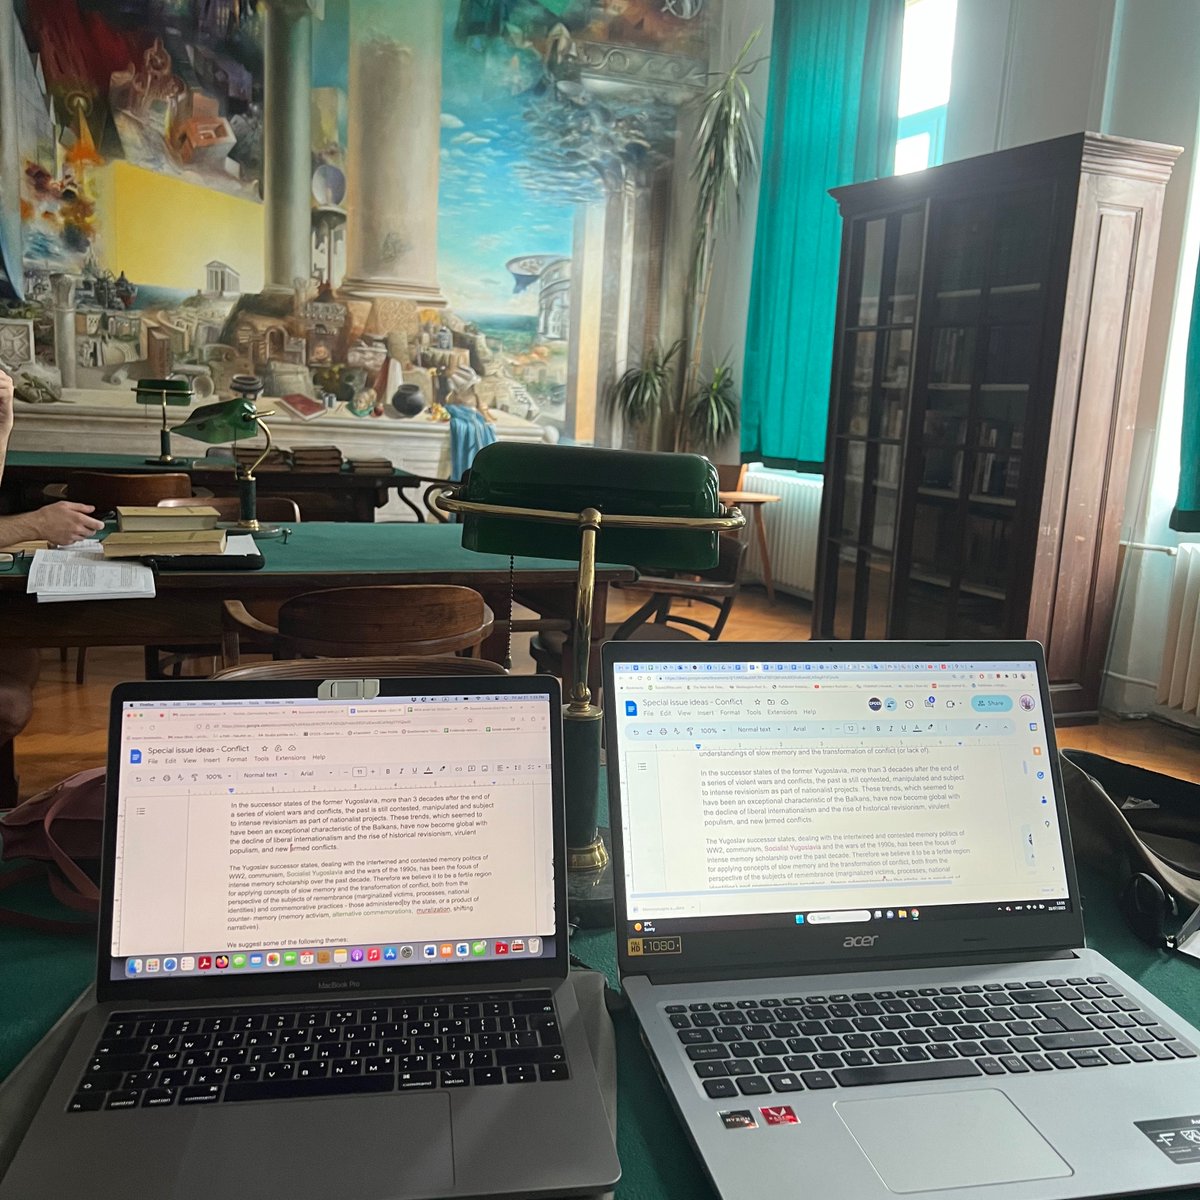 Found this lovely space in Pula with @VjeranPavlakov1 to continue our thinking and writing about #slowmemory and the transformations of #conflict cc: @slowmemo